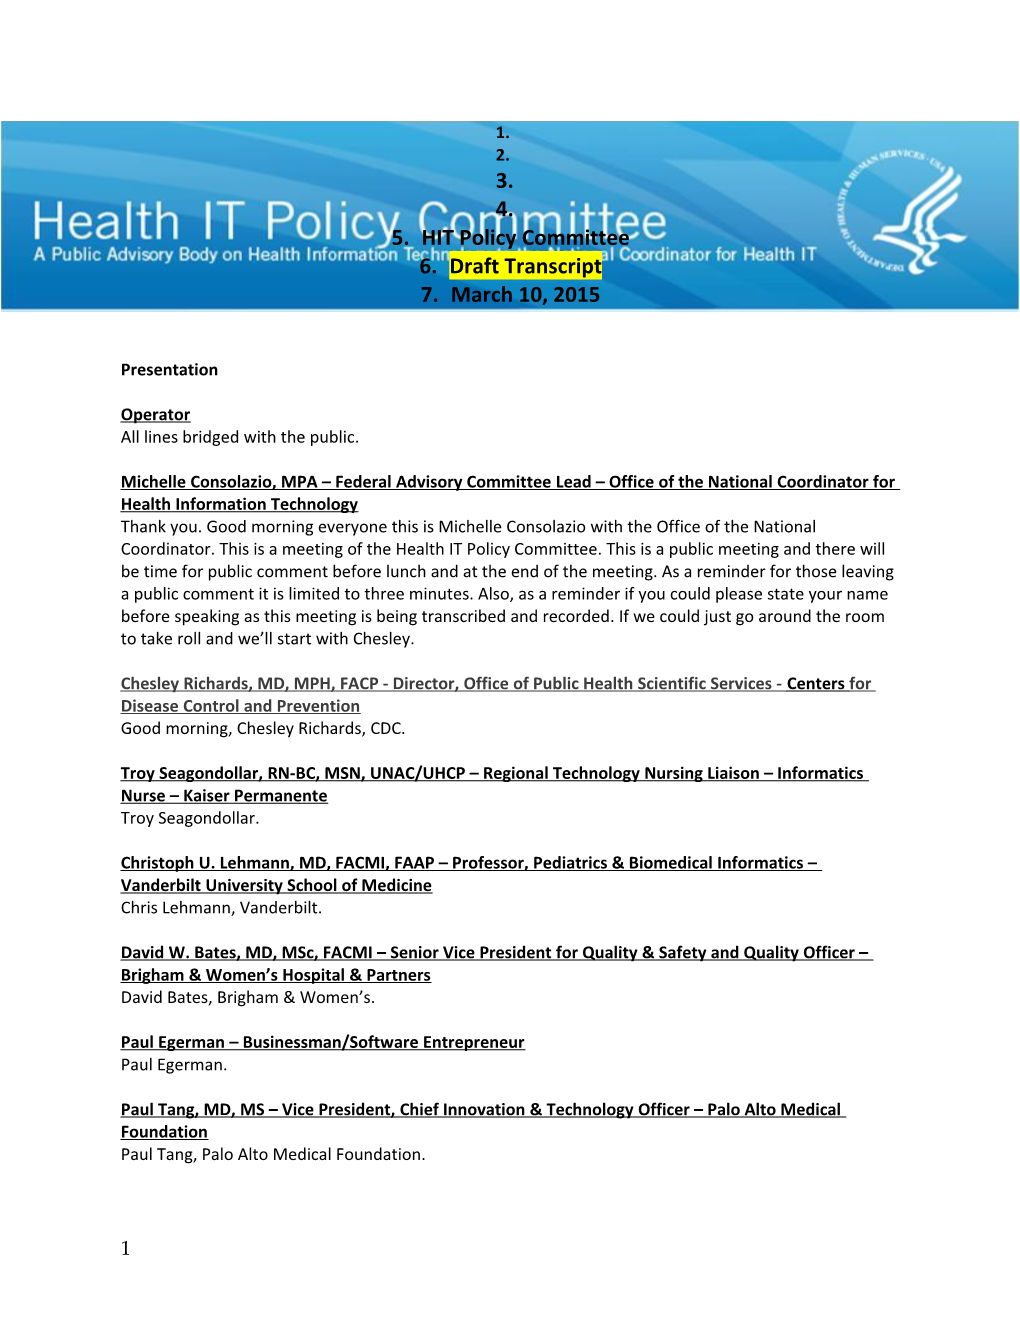 HIT Policy Committee Meaningful Use Workgroup Draft Transcript March 10, 2015